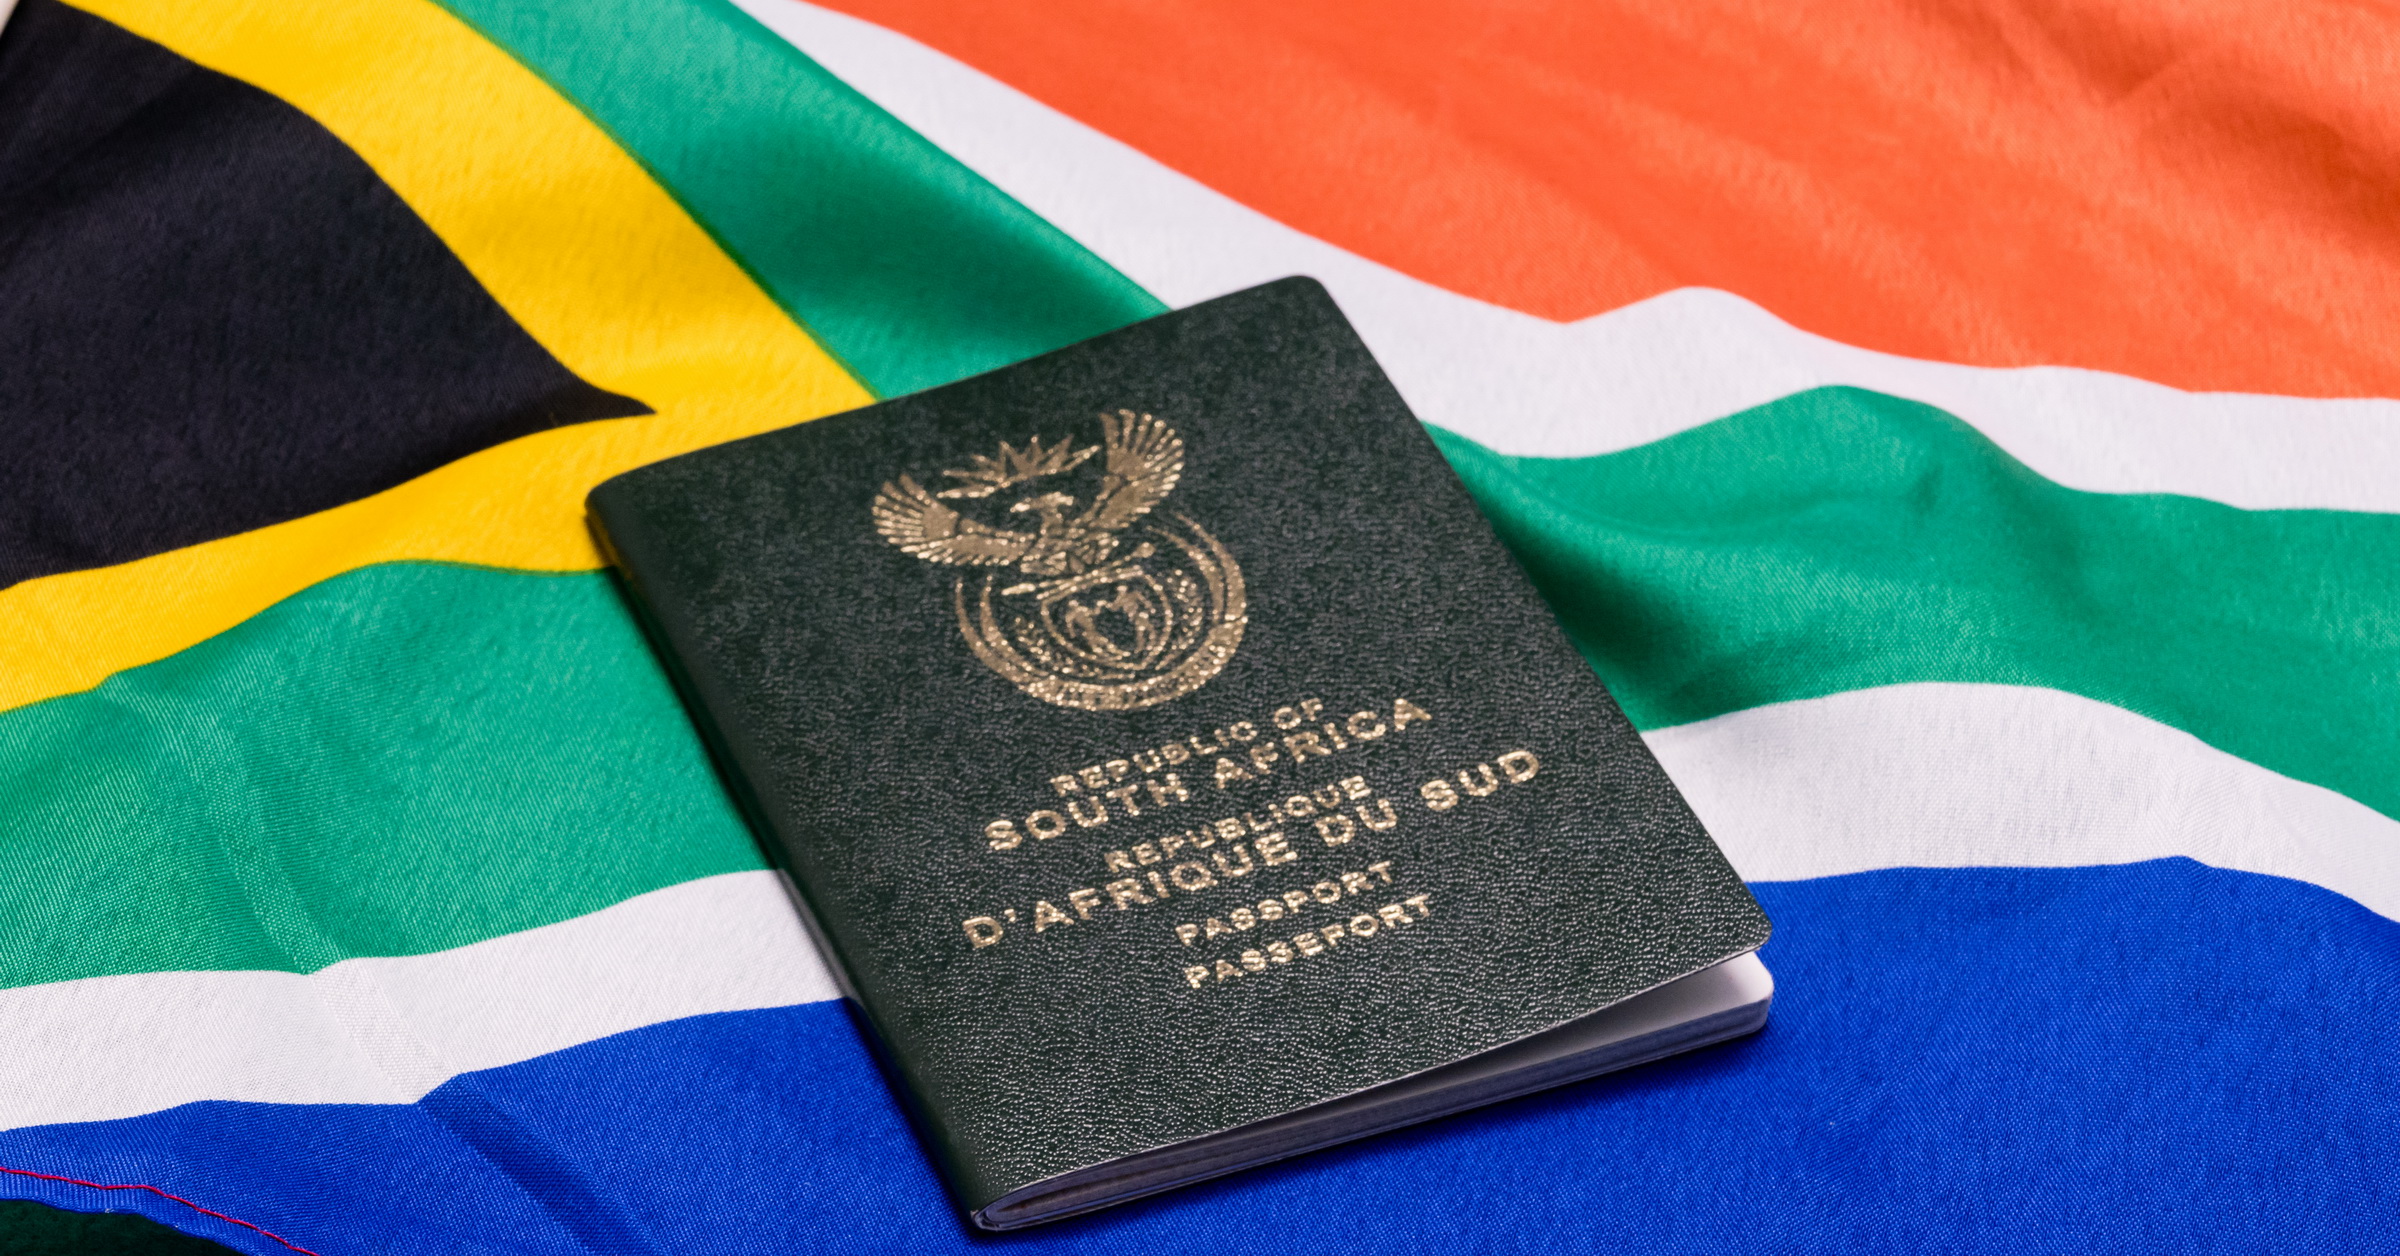 South African tax residency changes